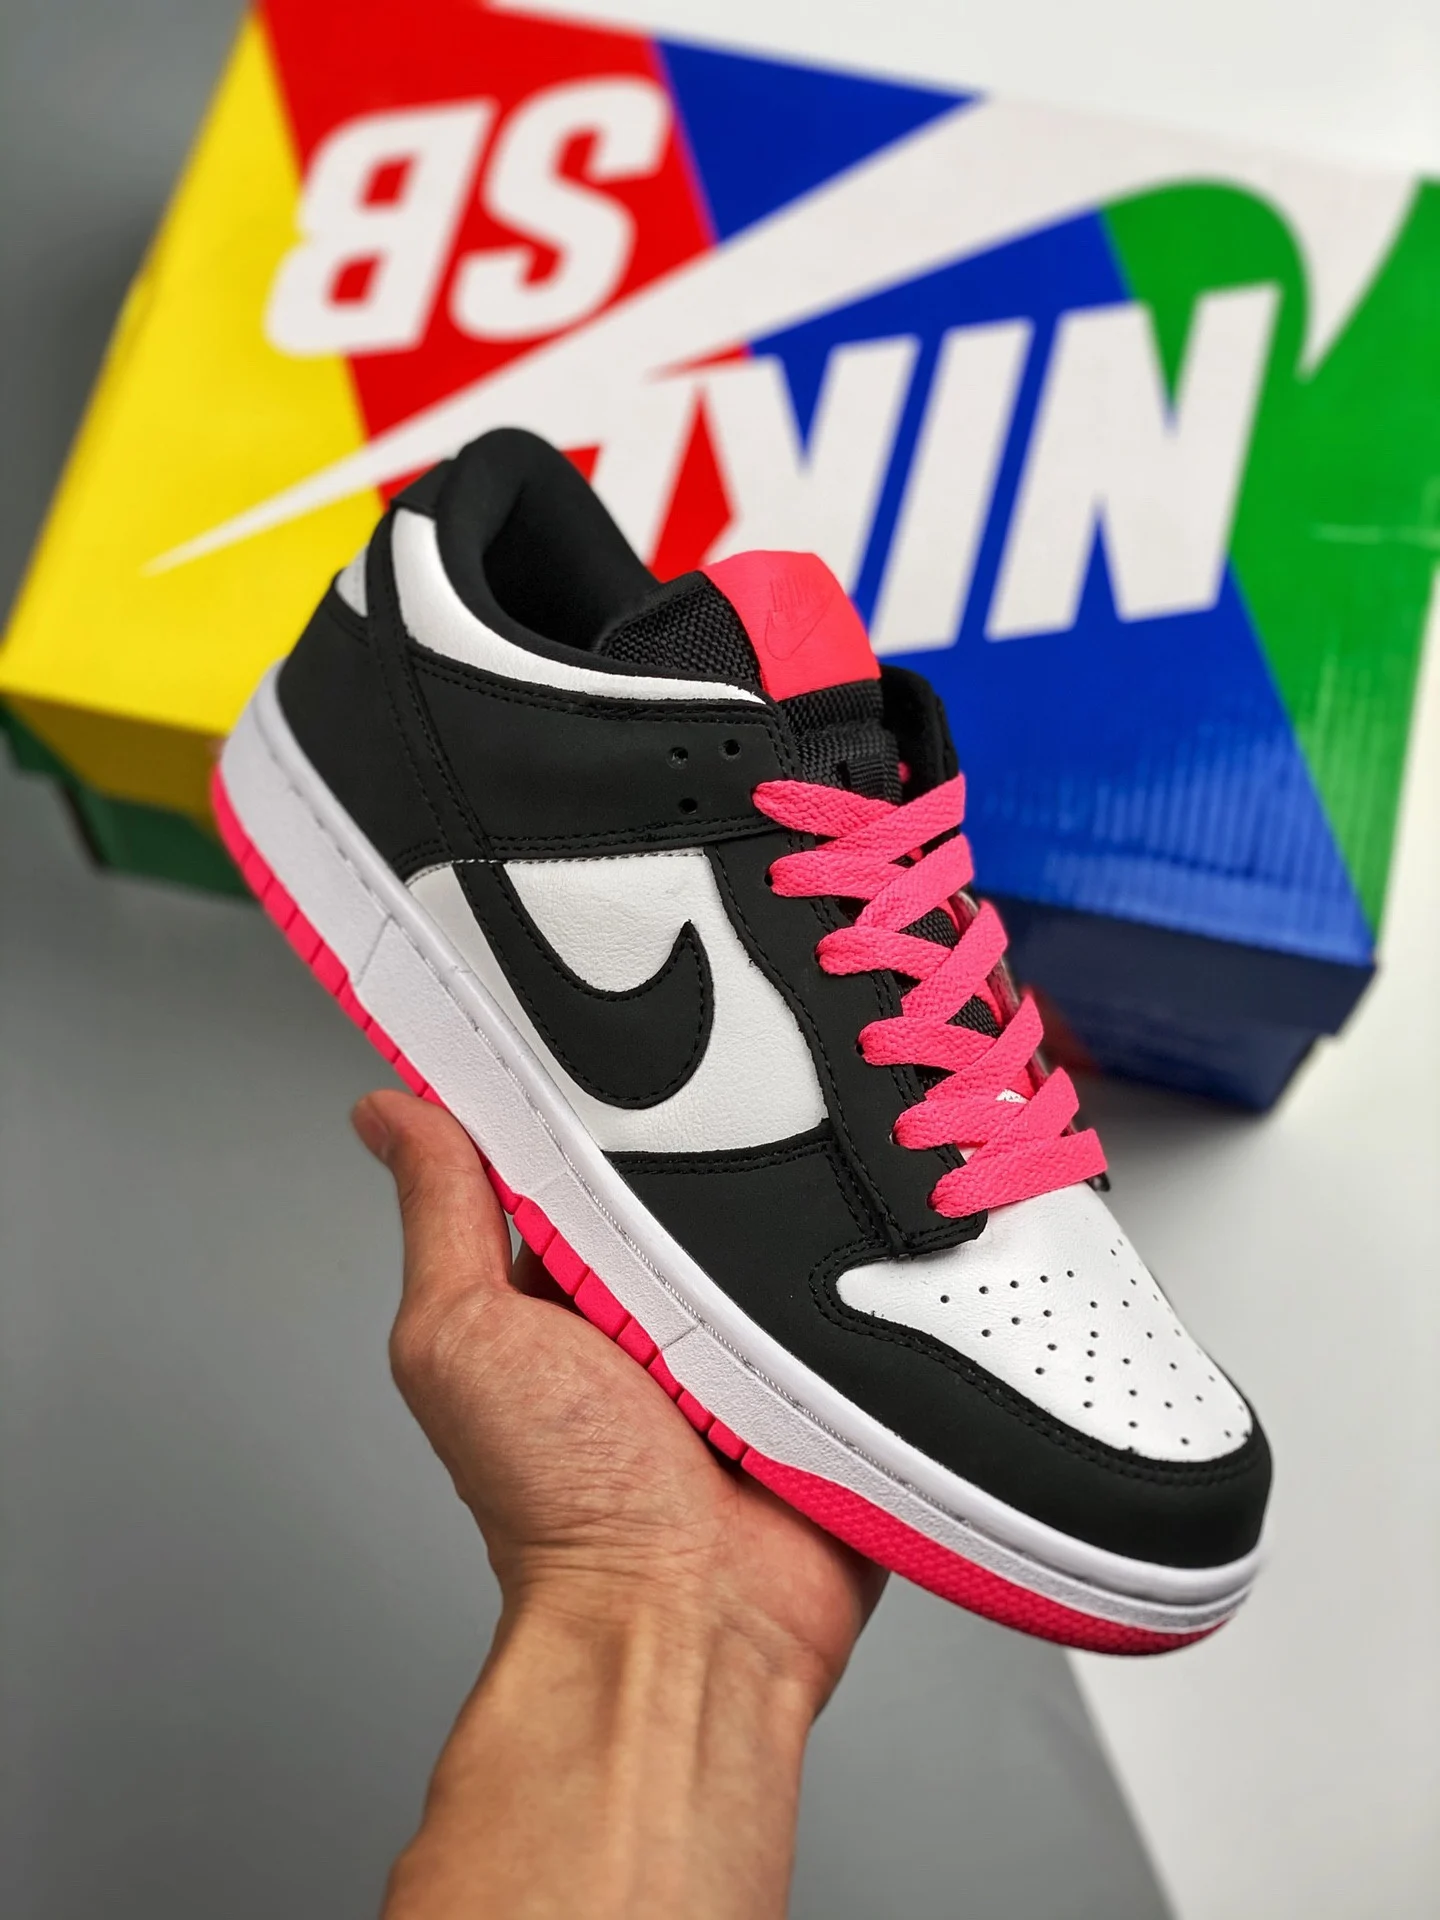 Nike Dunk Low White Metallic Silver-Rave Pink 317813-100 For Sale